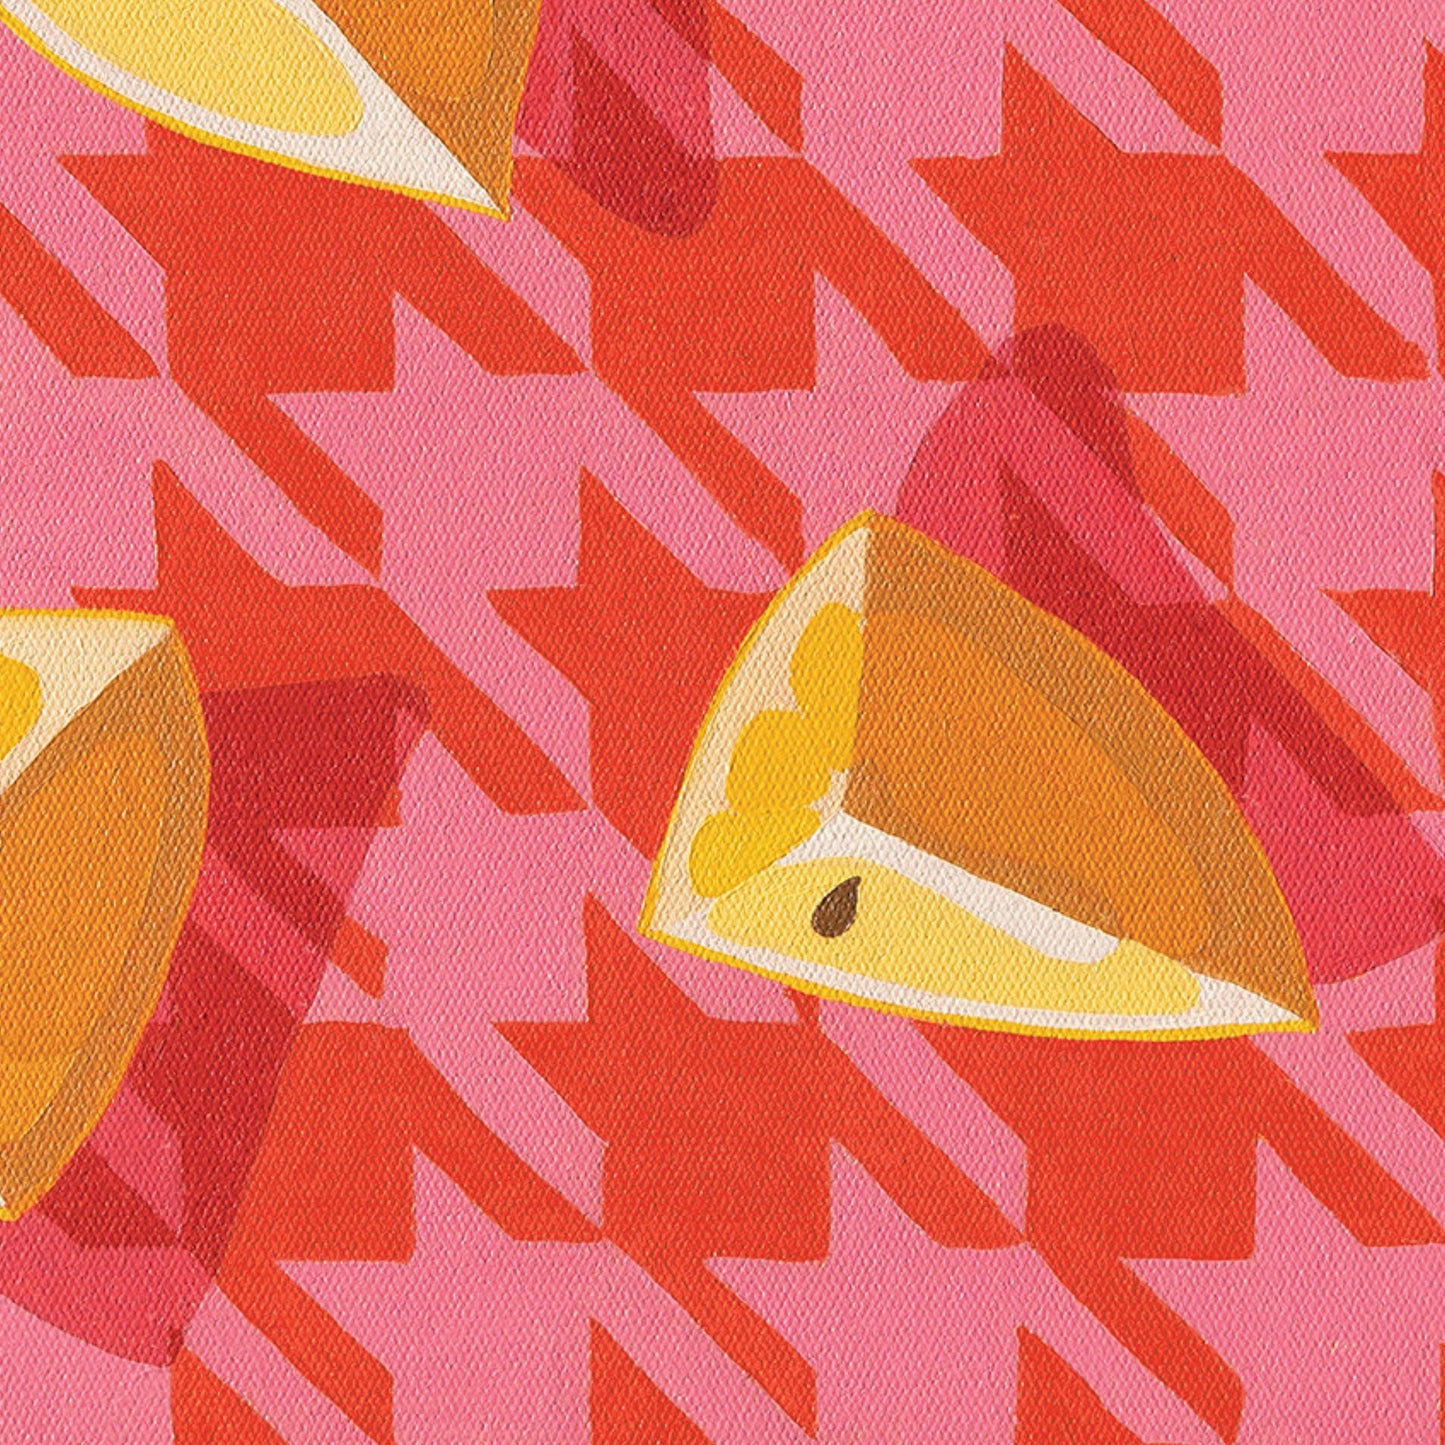 closeup of a fine art paper print of an original oil painting of three wedges of lemon on a pink and red houndstooth background